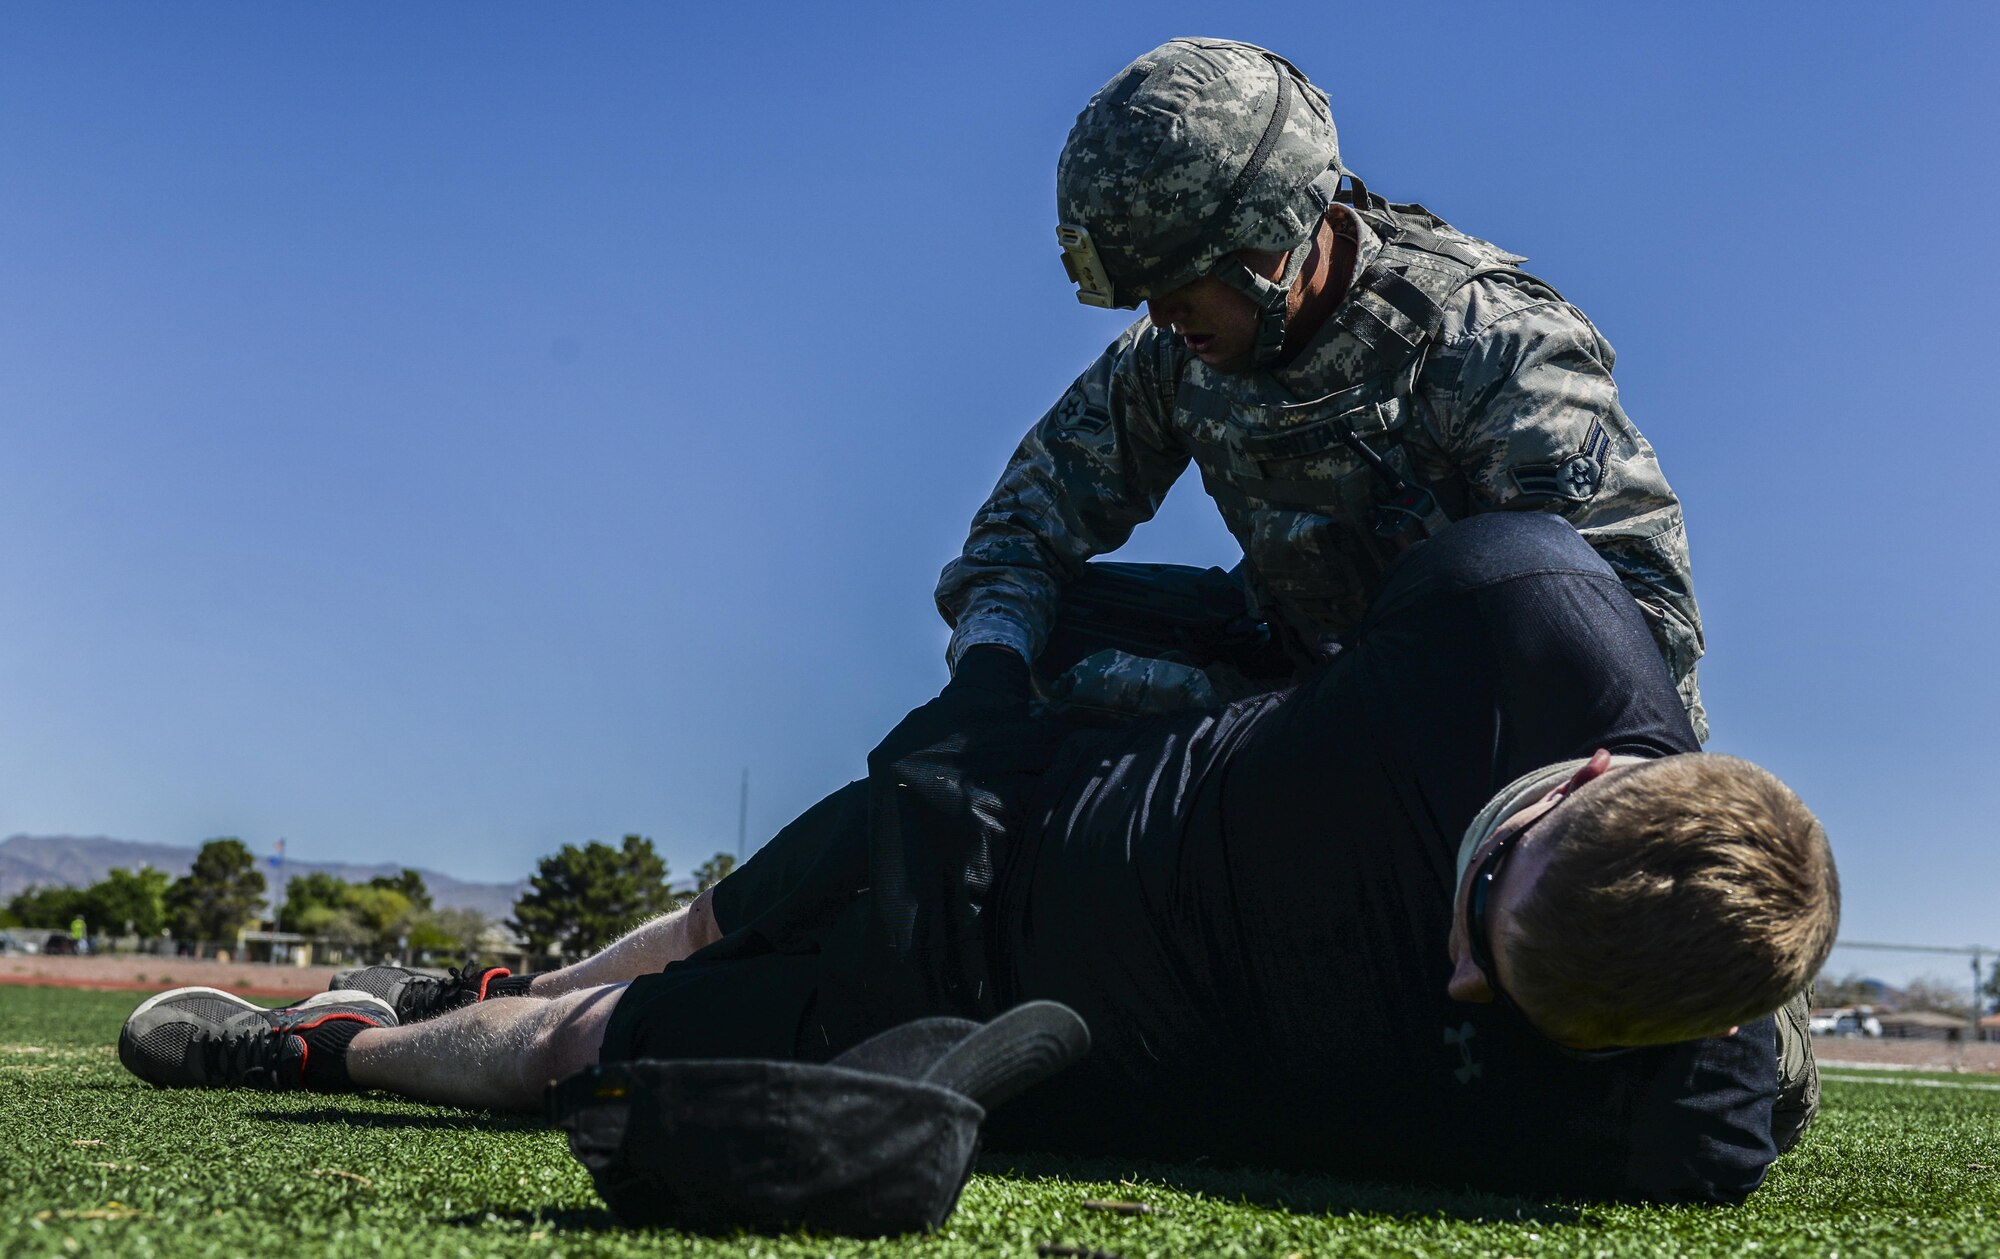 Airman 1st Class Mathew Brittain, 99th Security Forces Squadron, subdues and searches a simulated active shooter during a base wide exercise at Nellis Air Force Base, Nev., May 12, 2016. The 99th SFS was the first unit on the scene during the simulated scenario, followed by Explosive Ordnance Disposal, Emergency Management, the Fire Department and the Medical Group. (U.S. Air Force photo by Airman 1st Class Kevin Tanenbaum)